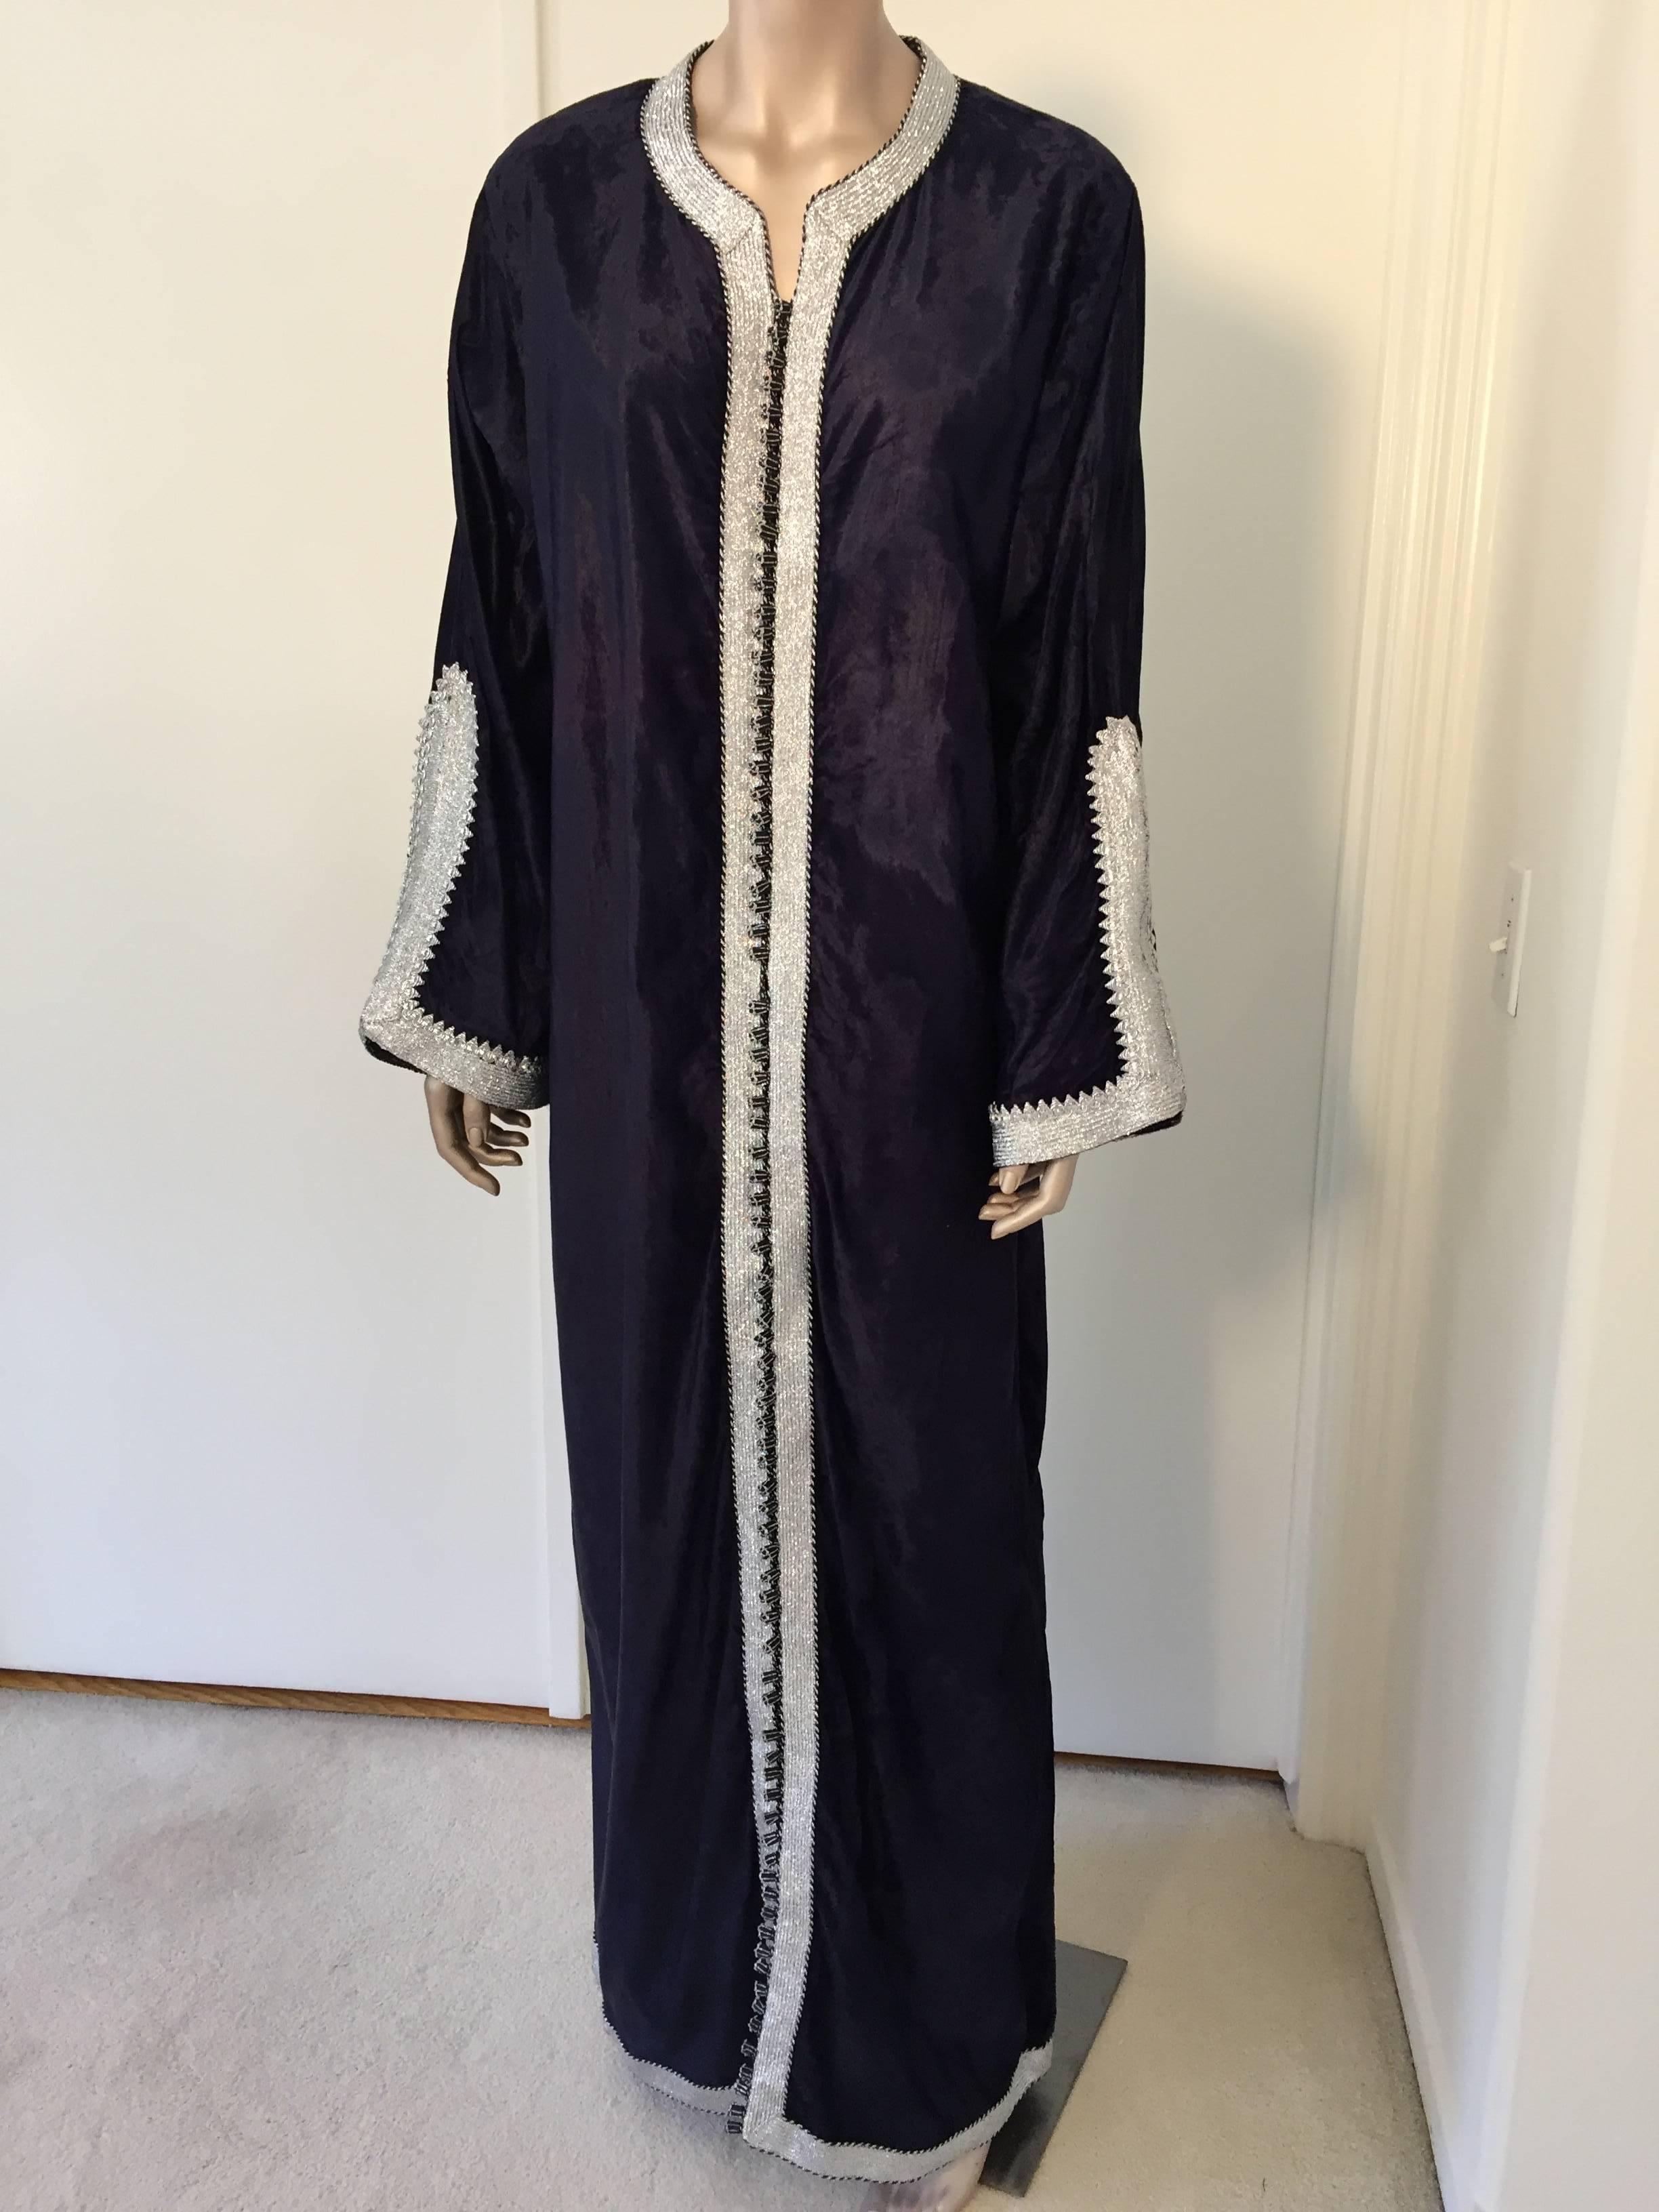 Elegant Moroccan caftan deep midnight blue velvet embroidered with silver metallic threads,
circa 1970s.
This long maxi dress kaftan is embroidered and embellished entirely by hand.
One of a kind evening Moroccan Middle Eastern gown.
The kaftan